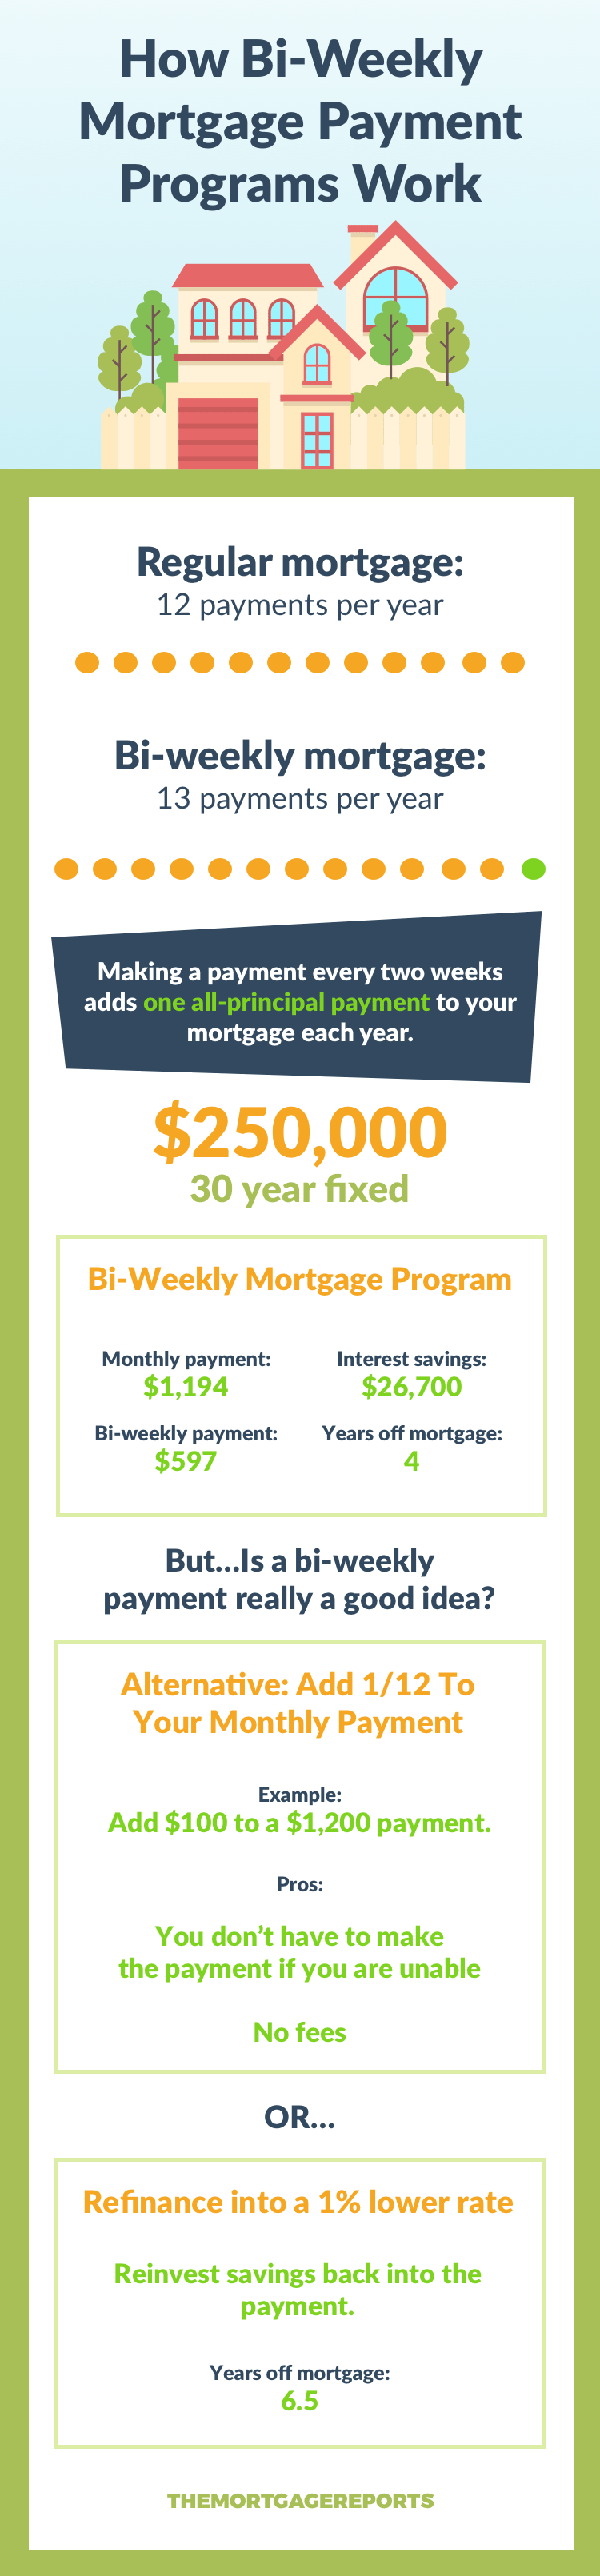 mortgage example